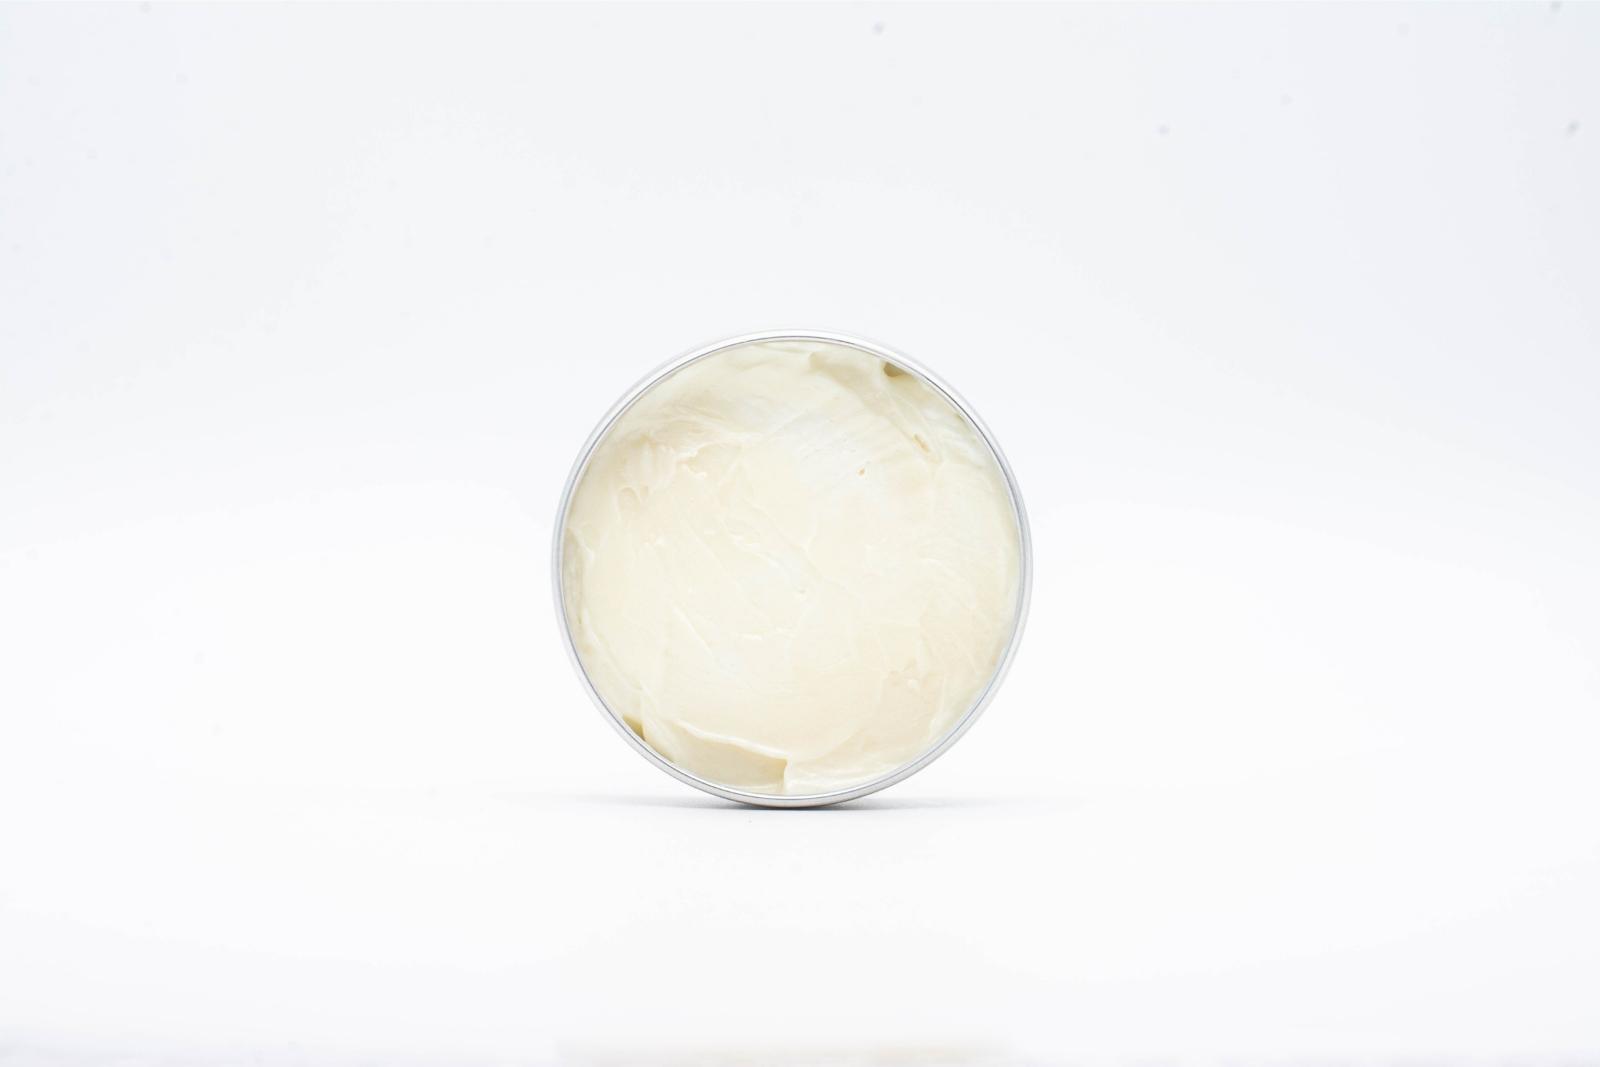 An opened small can to show the color and texture of Tonic's Outer Space CBD + CBG body butter, on a white background